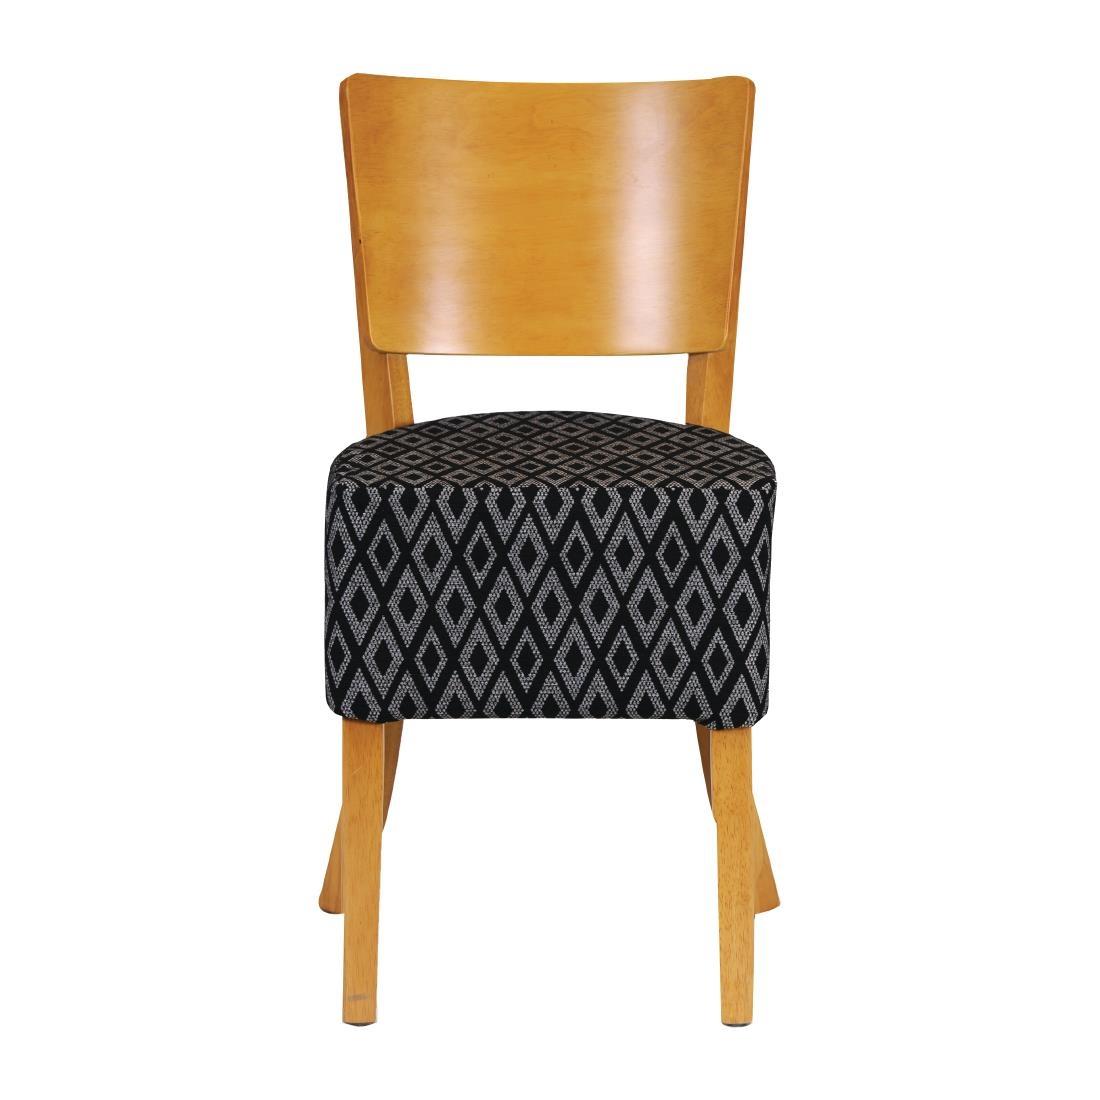 Asti Padded Soft Oak Dining Chair with Blue Diamond Deep Padded Seat and Back (Pack of 2) - FT426  - 2